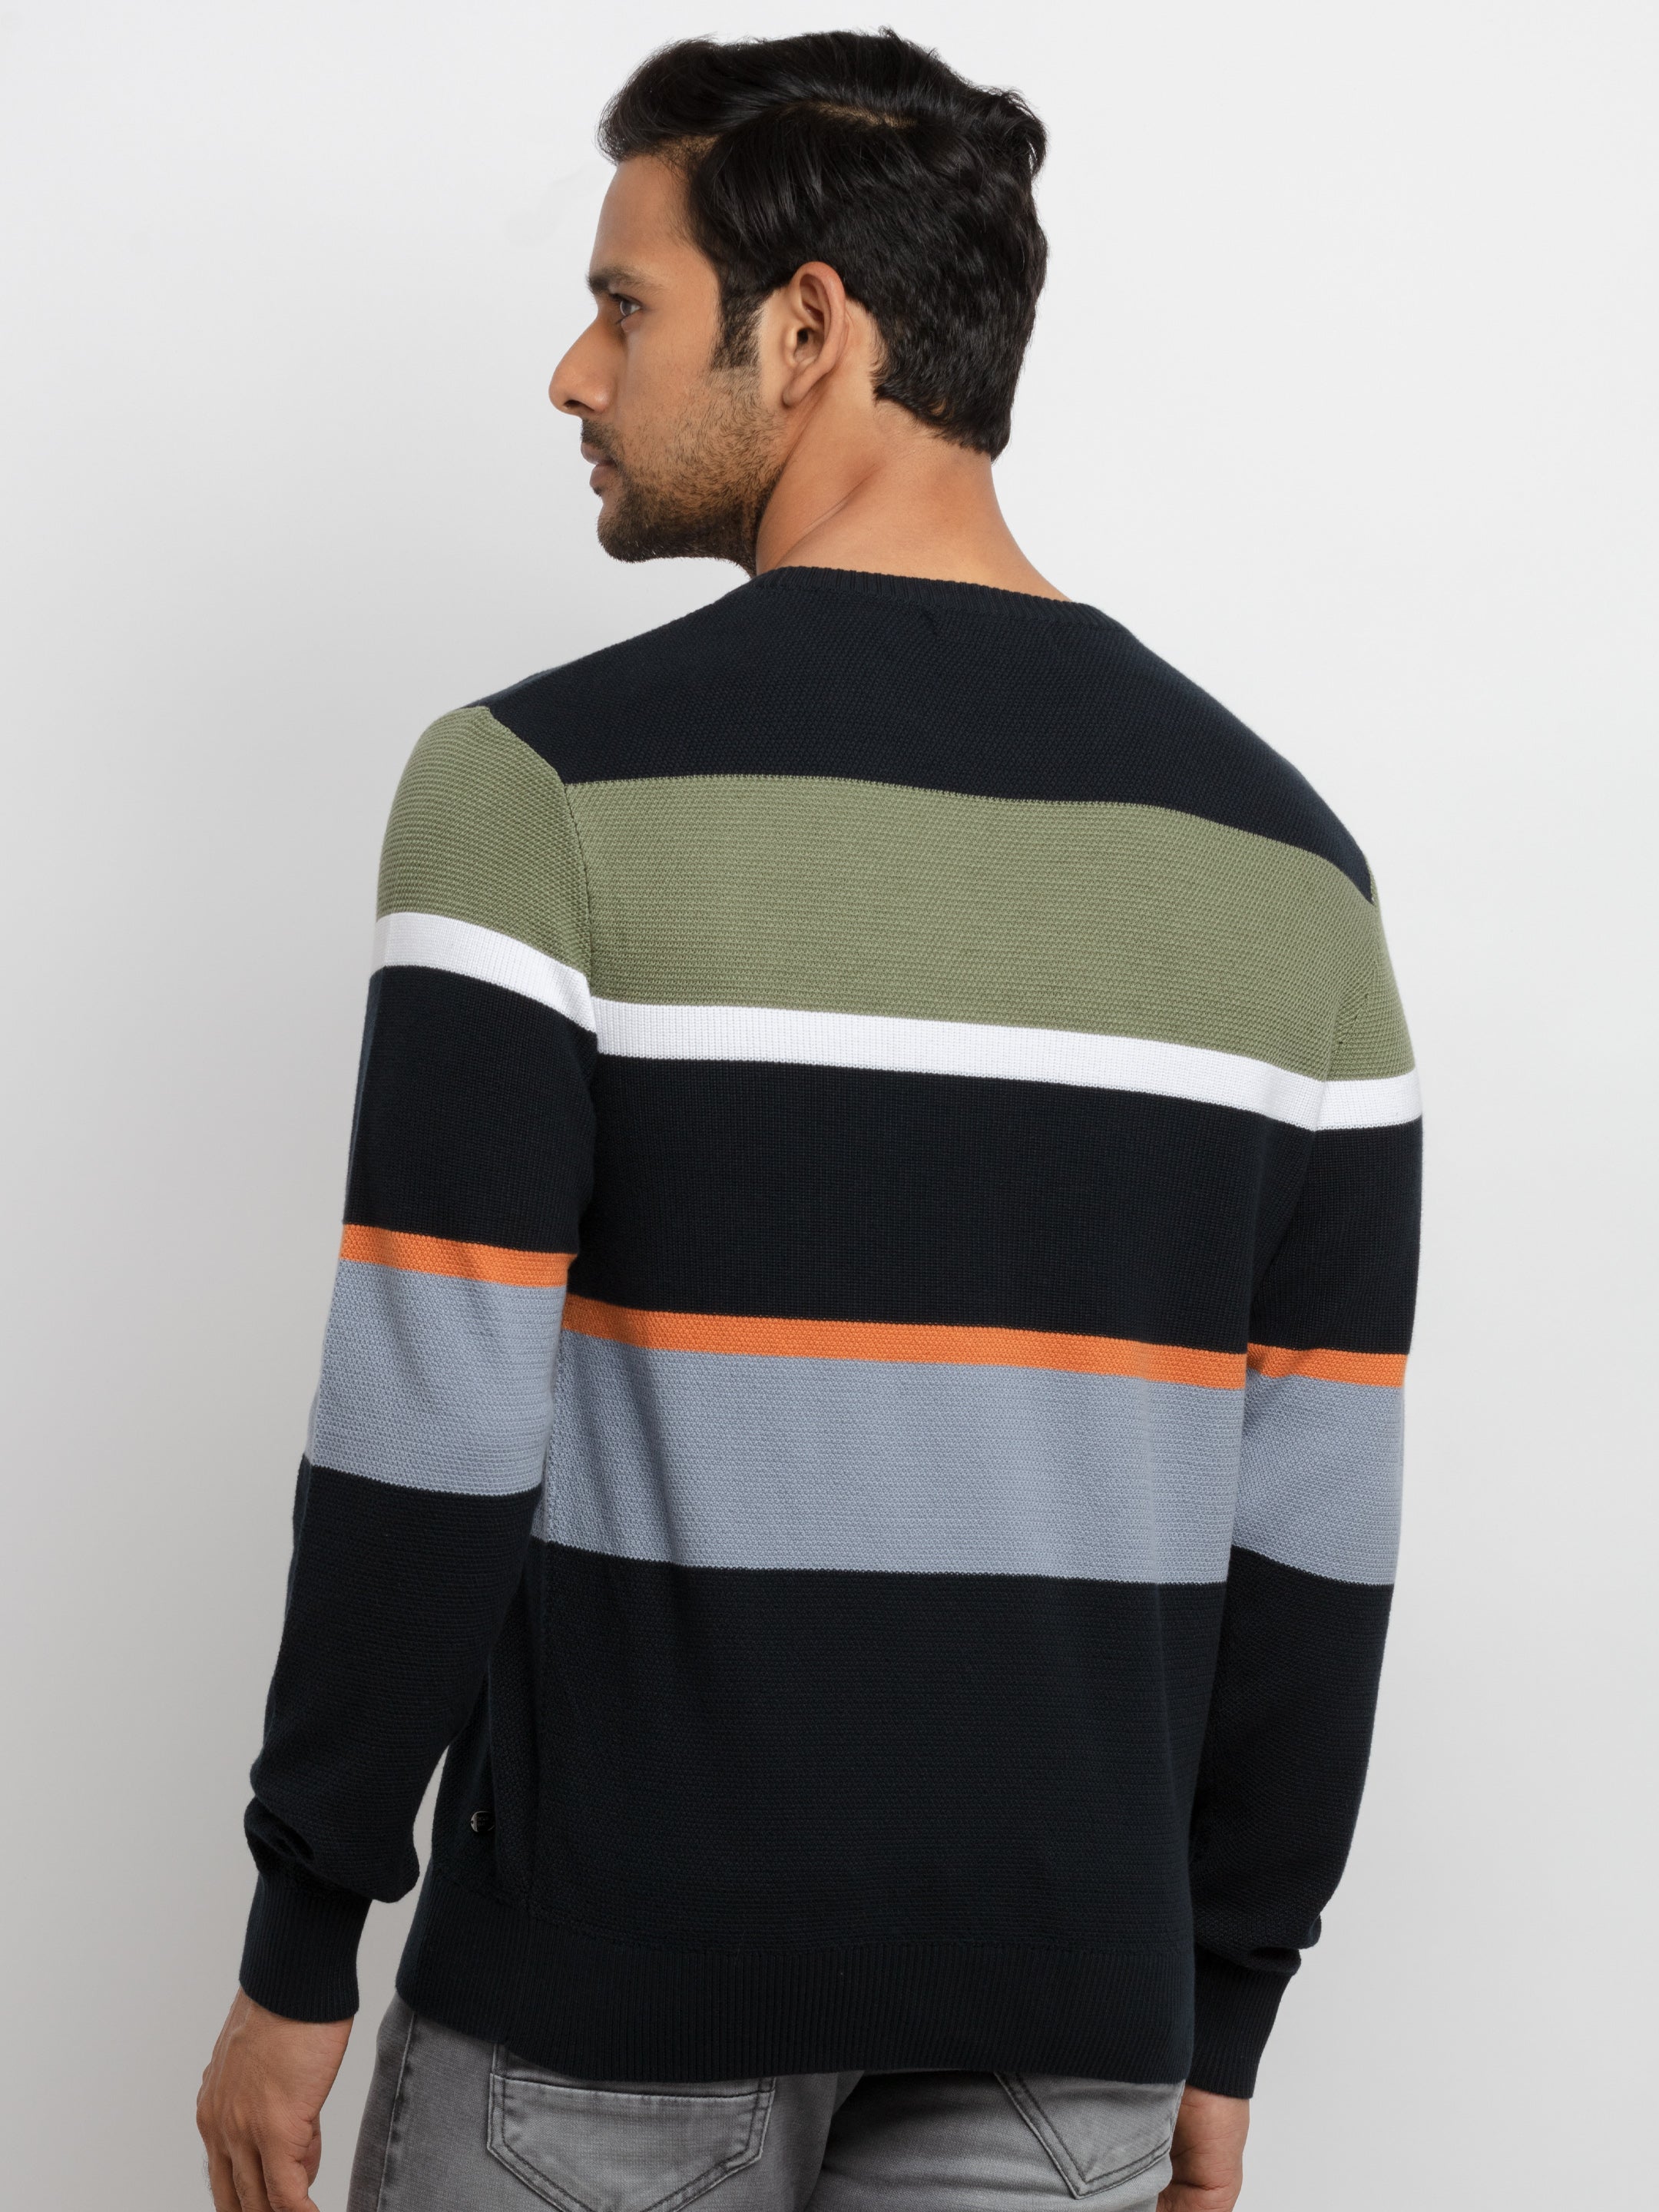 Mens Structure Knit Round Neck Sweater